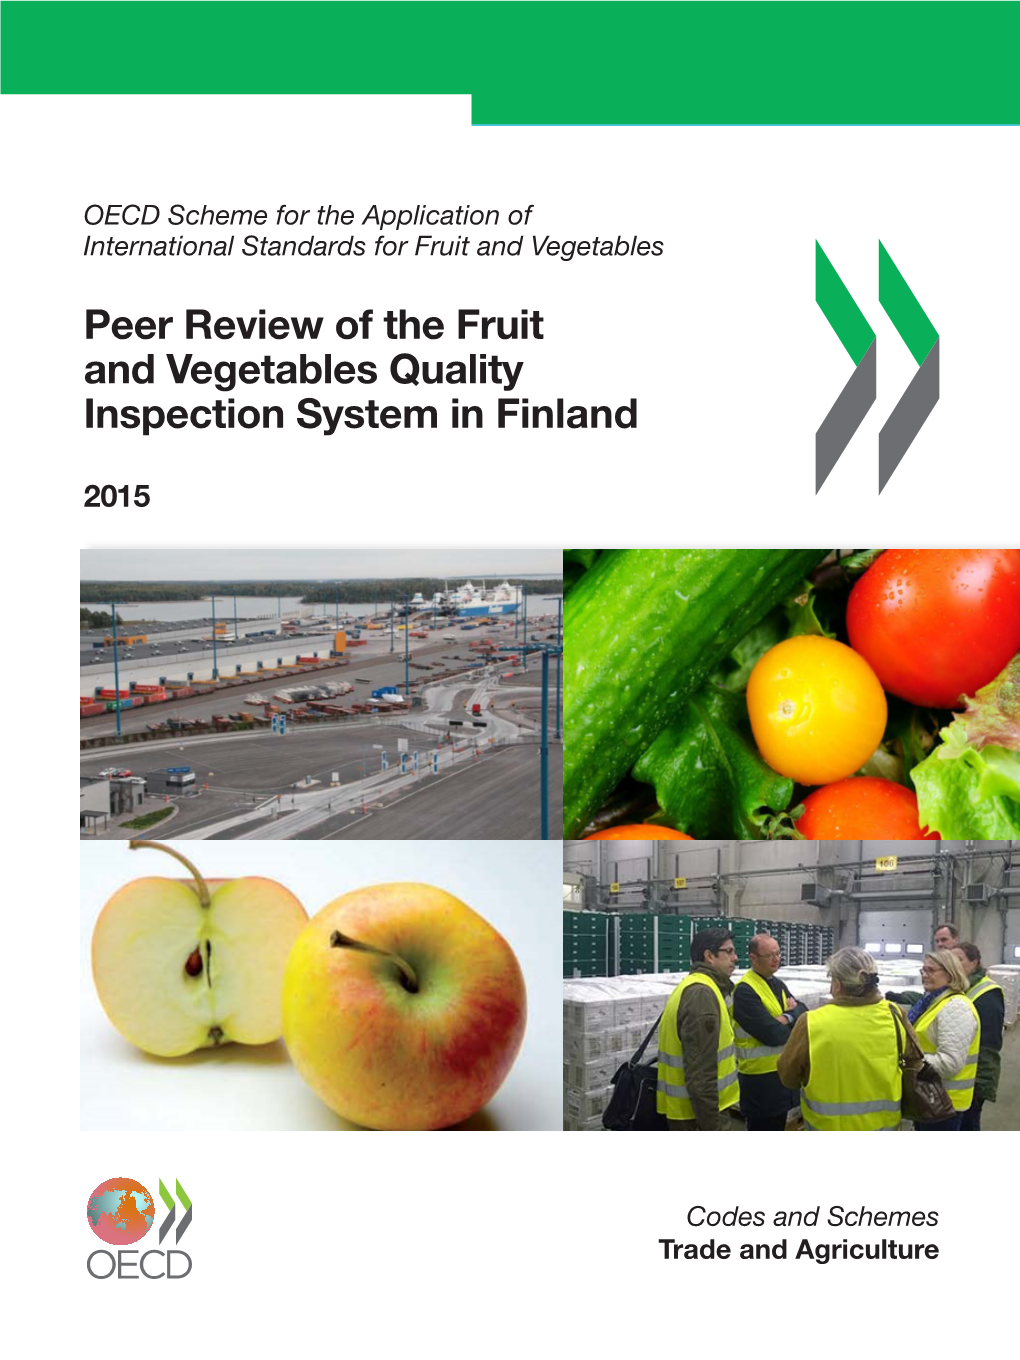 Peer Review of the Fruit and Vegetables Quality Inspection System in Finland